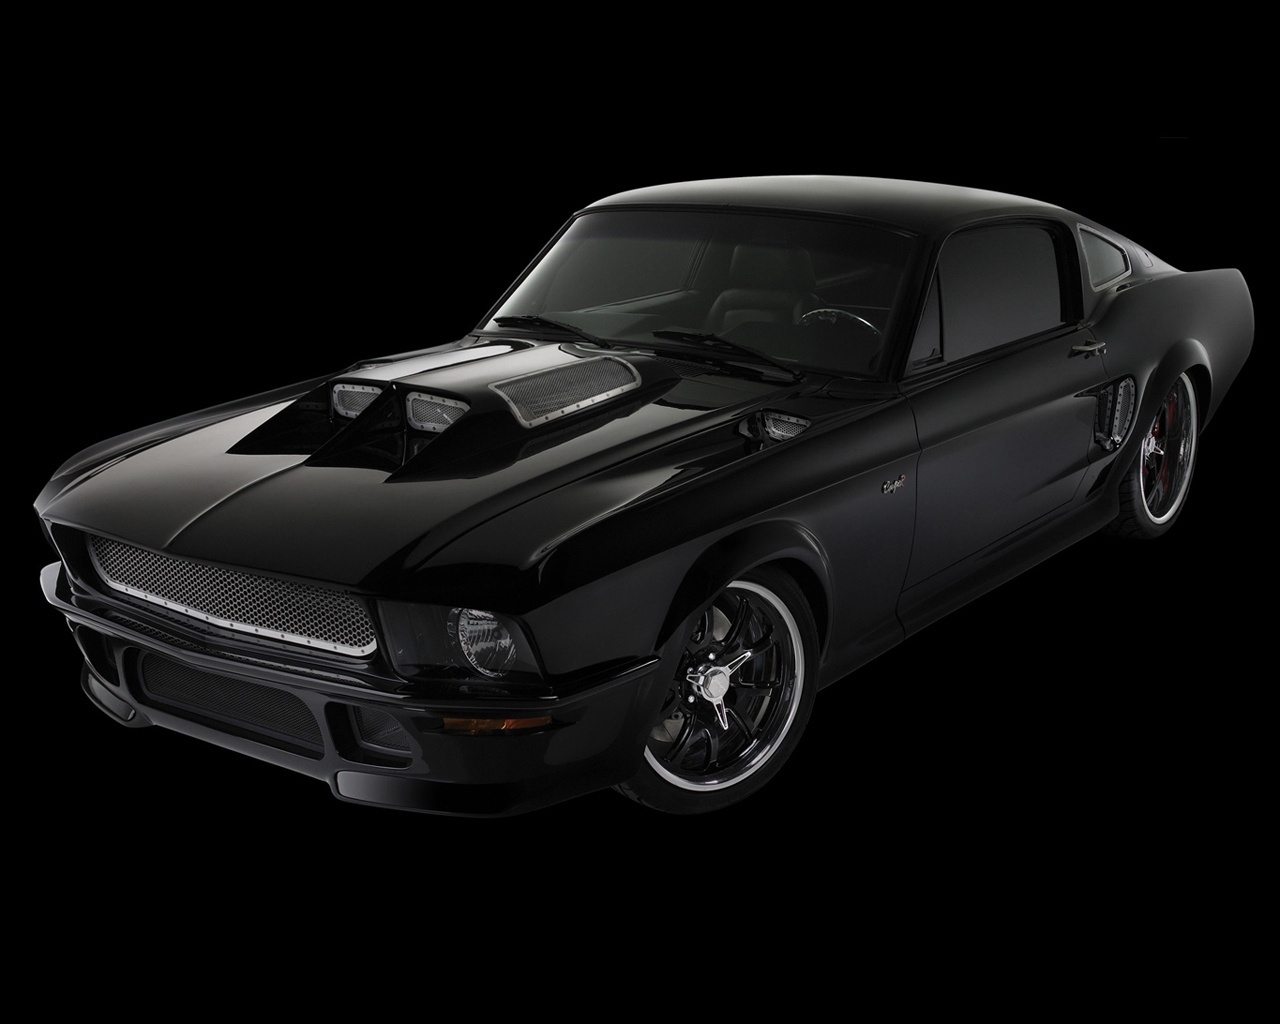 Ford Mustang Obsidian 2008 for 1280 x 1024 resolution